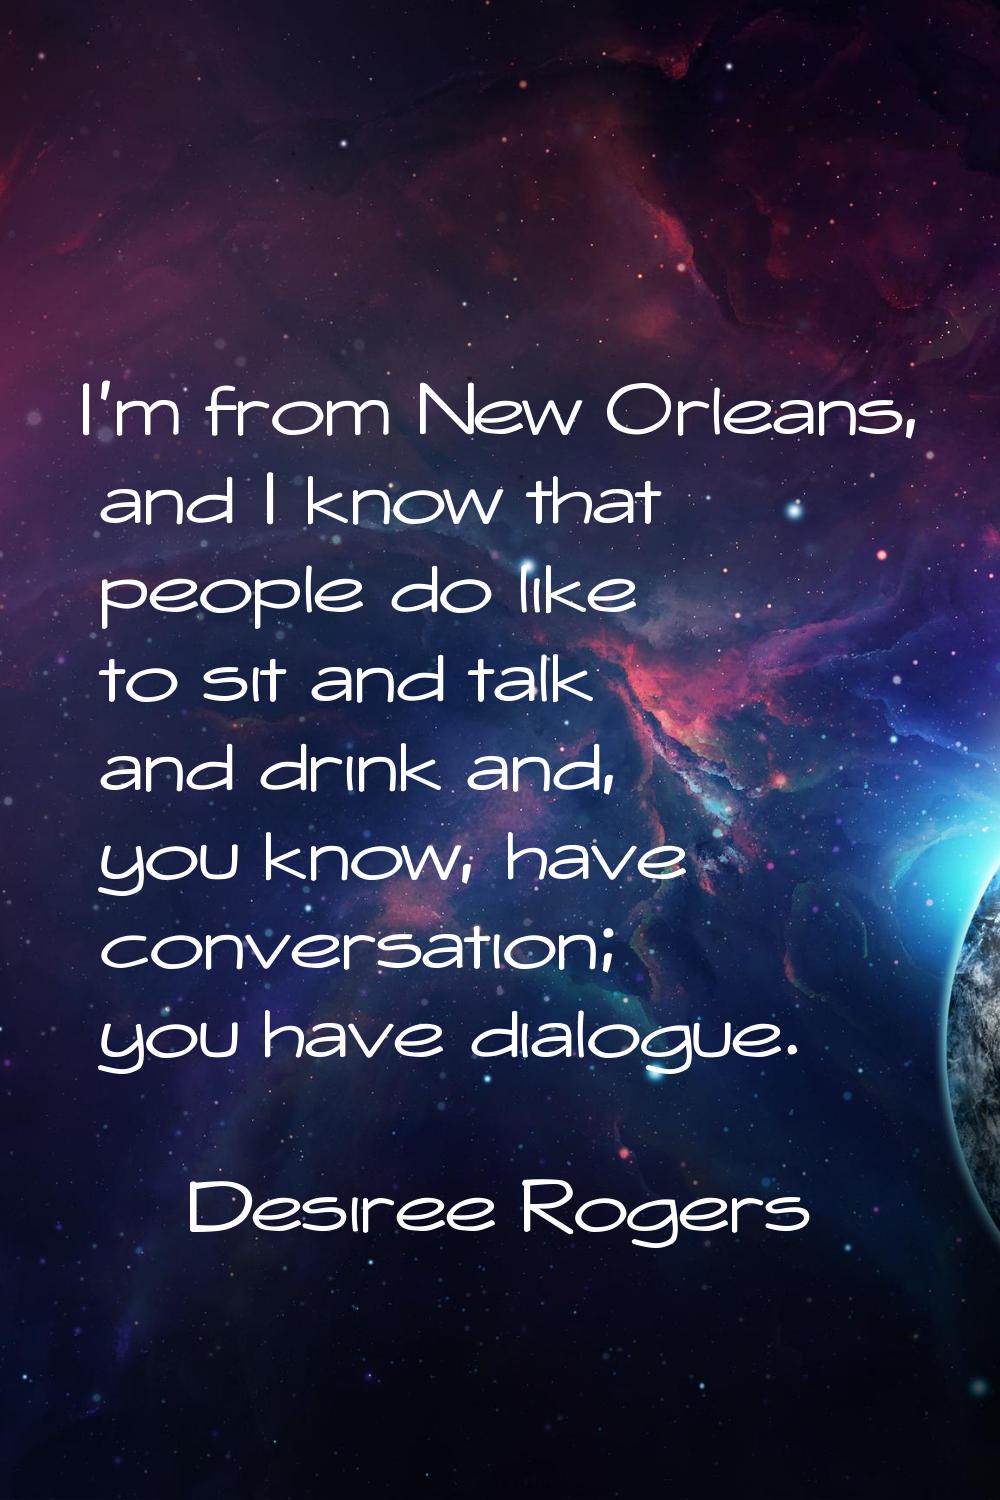 I'm from New Orleans, and I know that people do like to sit and talk and drink and, you know, have 